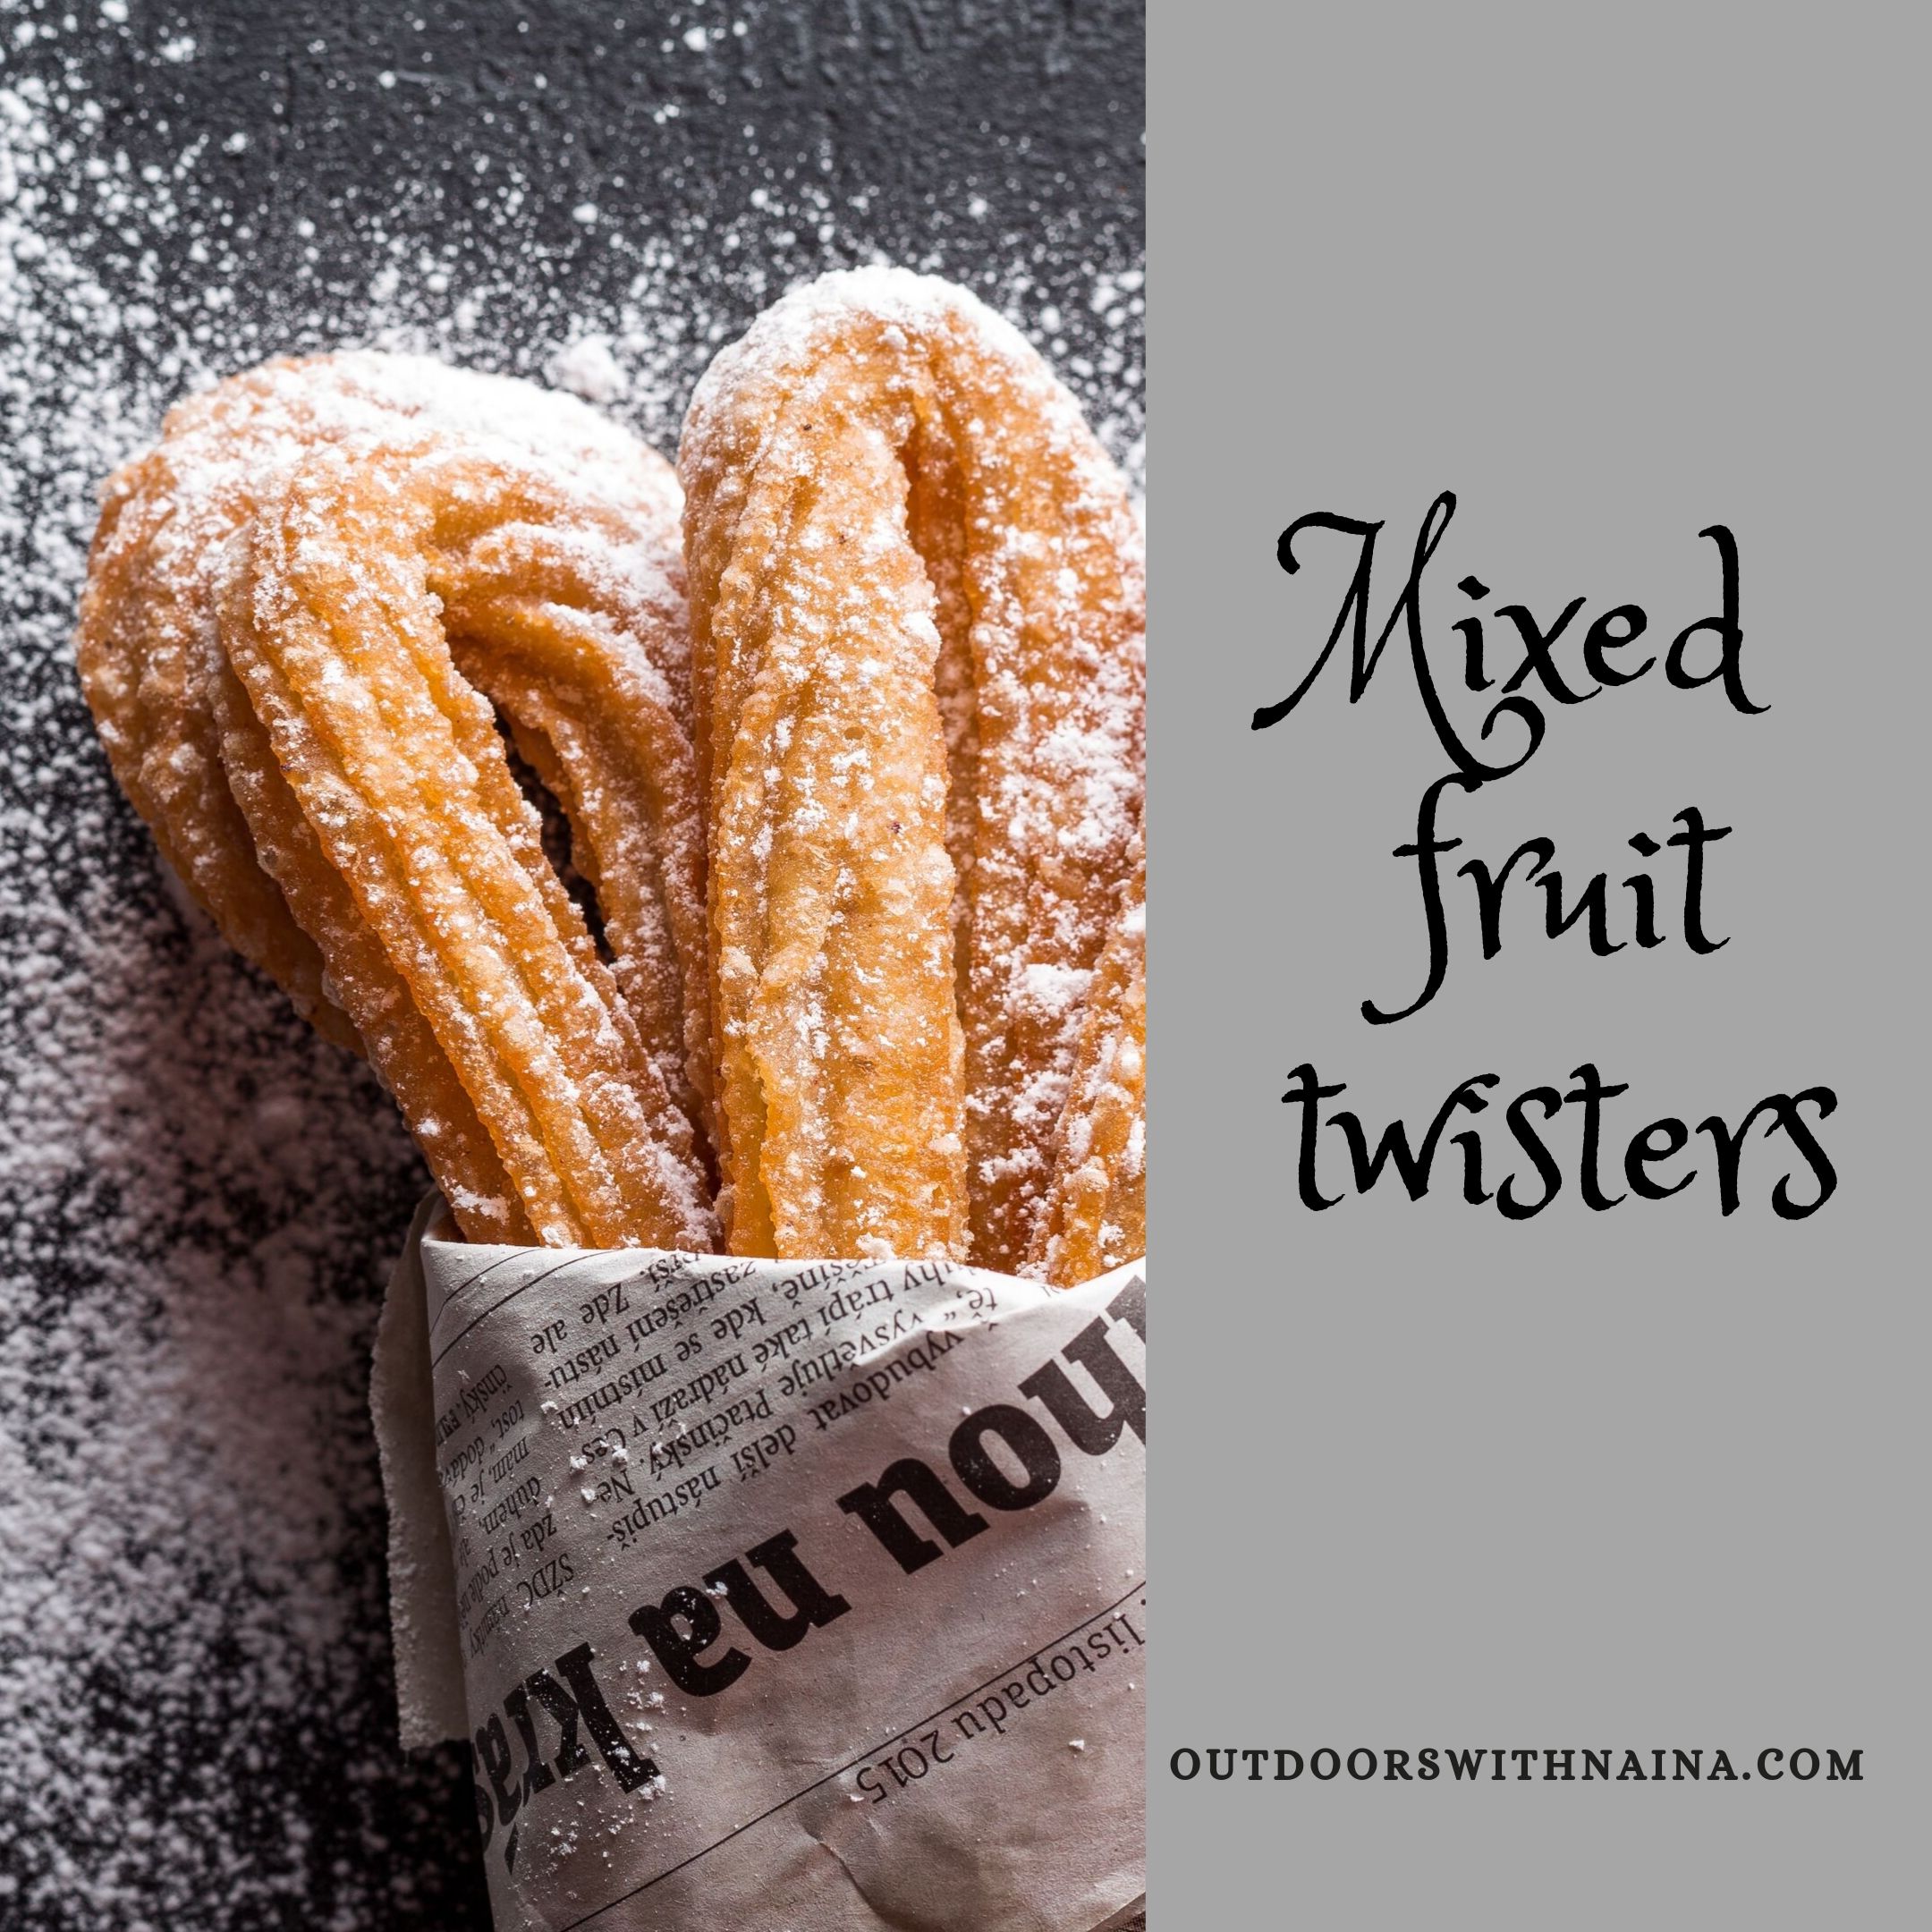 Mixed Fruit Twisters